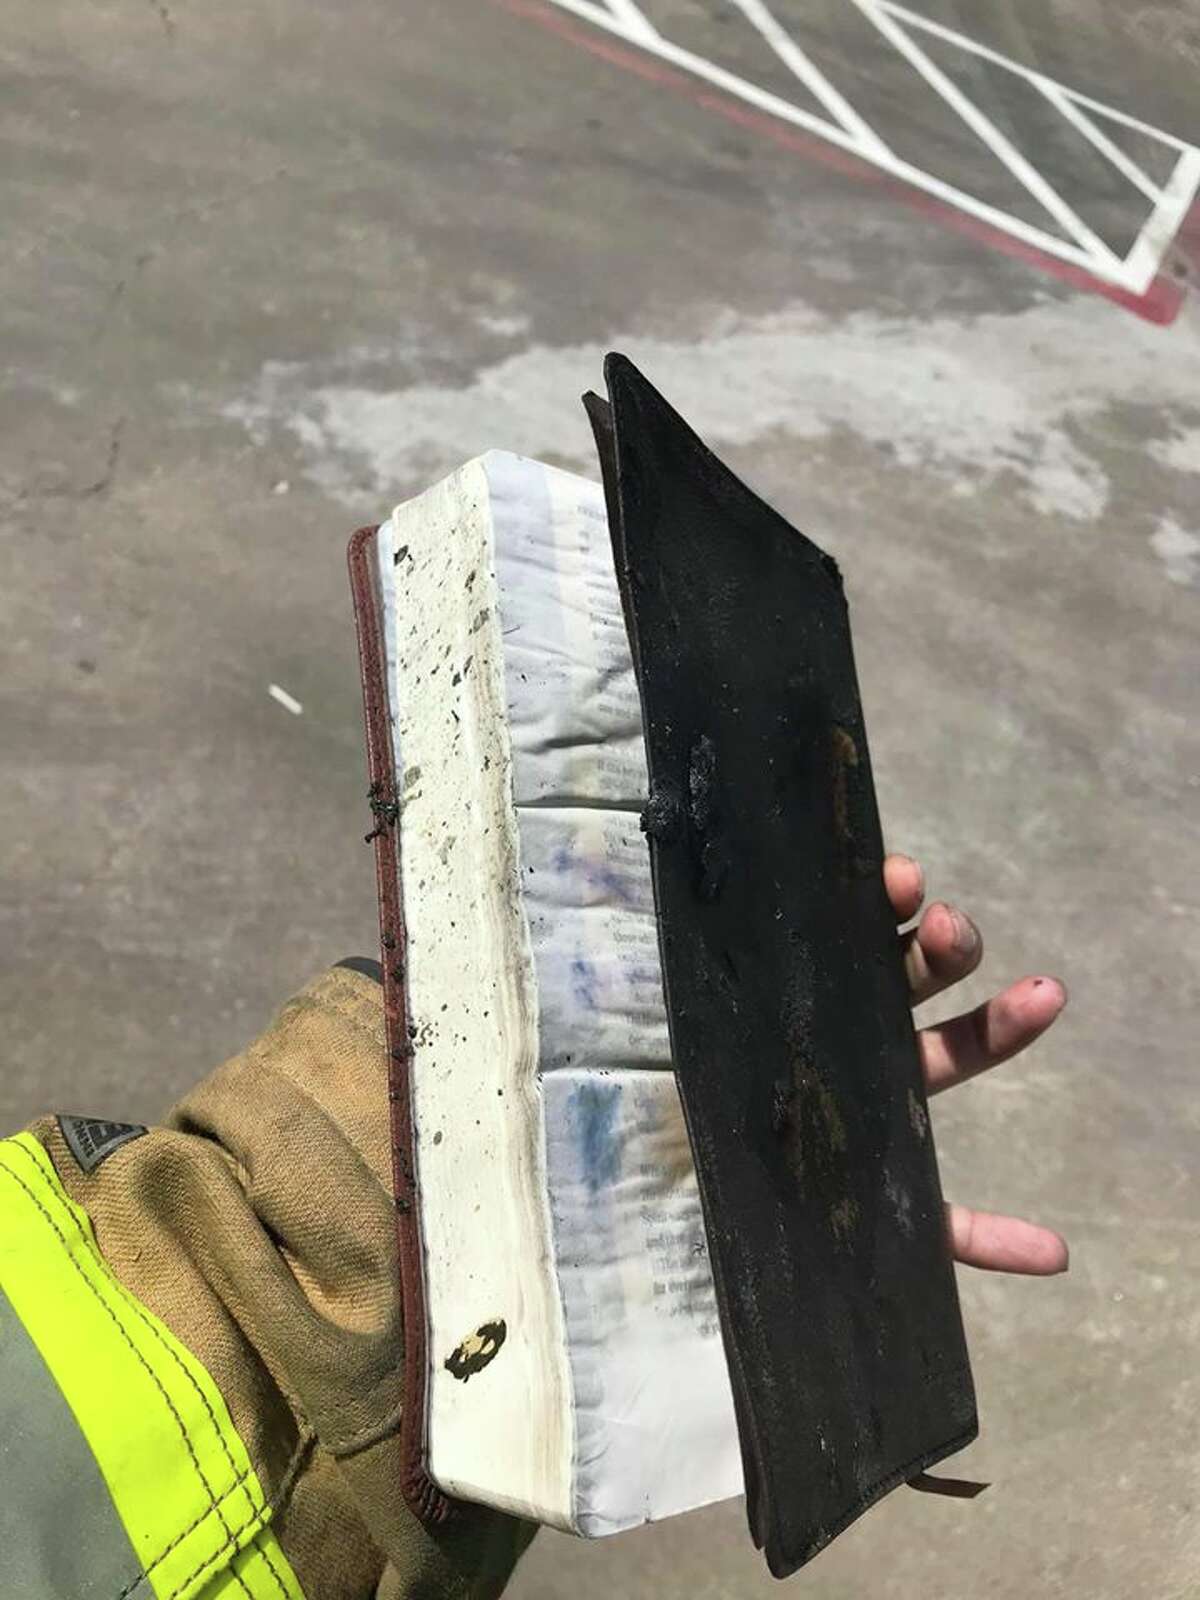 Sunday afternoon the Deer Park Fire Department was dispatched to a truck engulfed in flames on Battleground Rd. The woman driving was uninjured. Upon searching the truck, a bible and a notebook that belonged to the driver were seemingly untouched.